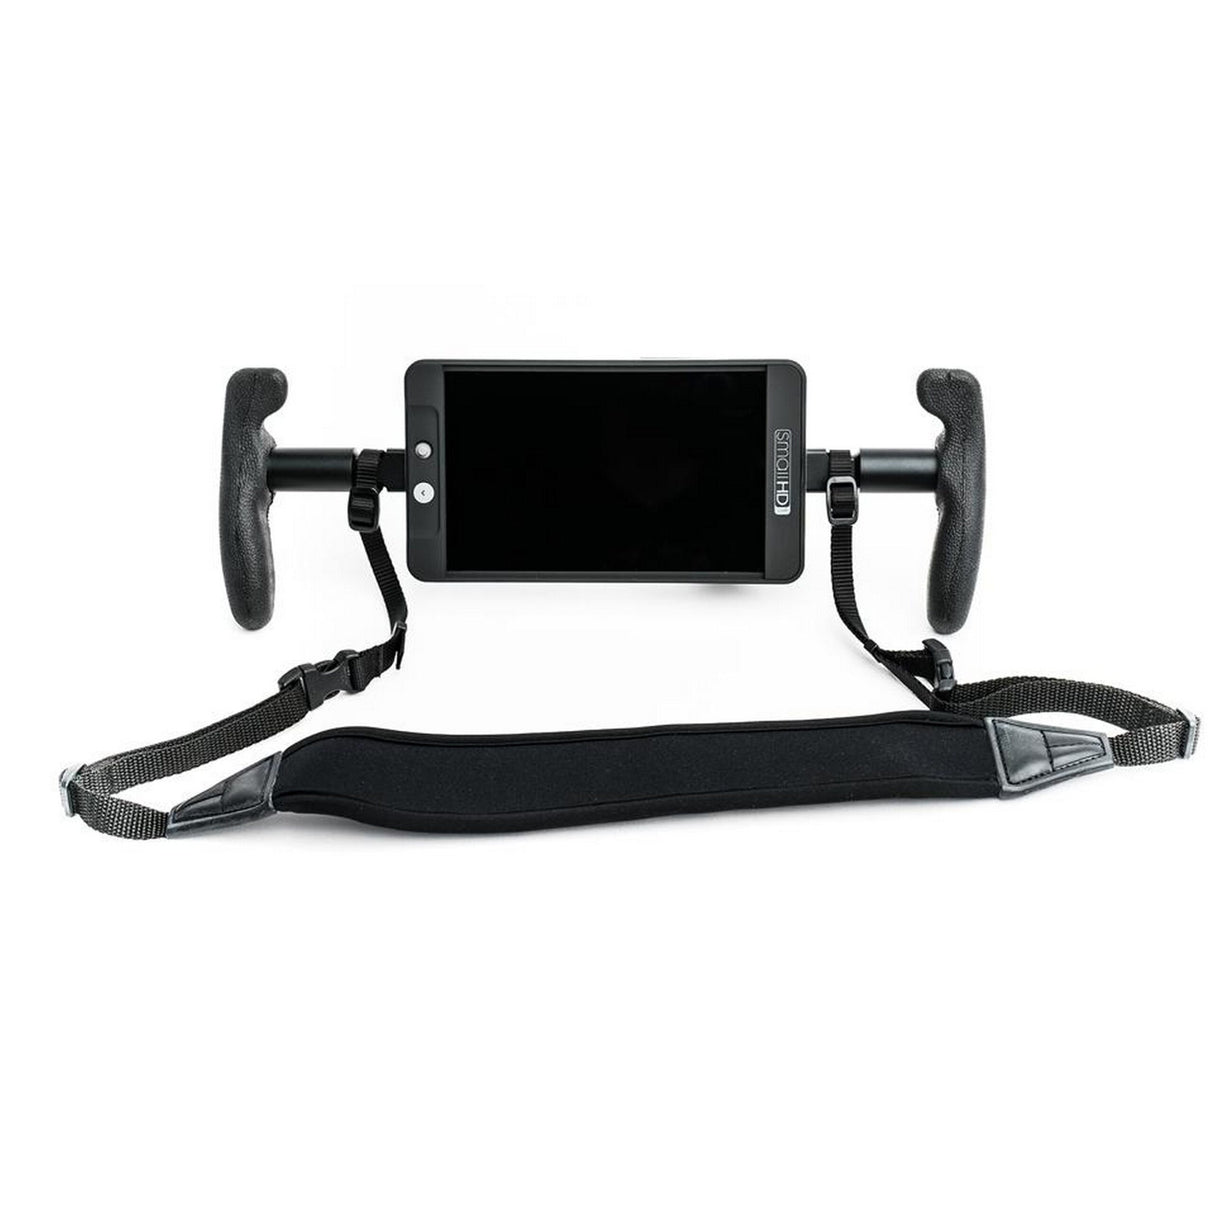 SmallHD ACC-HANDLES Monitor Handles and Neck Strap